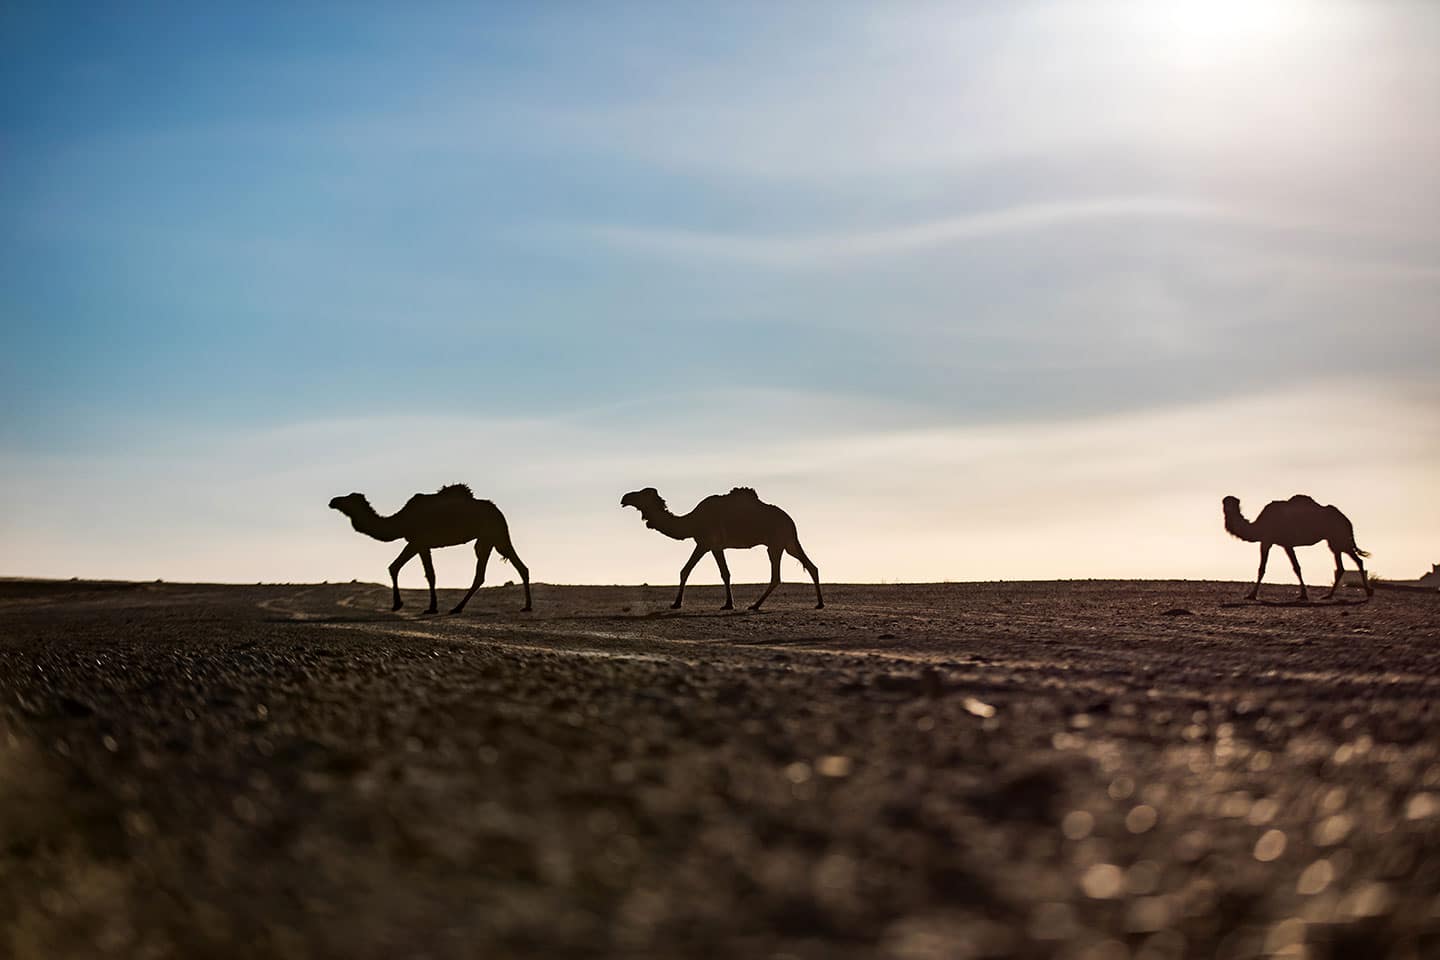 Wild camels in the Sahara Desert, Morocco